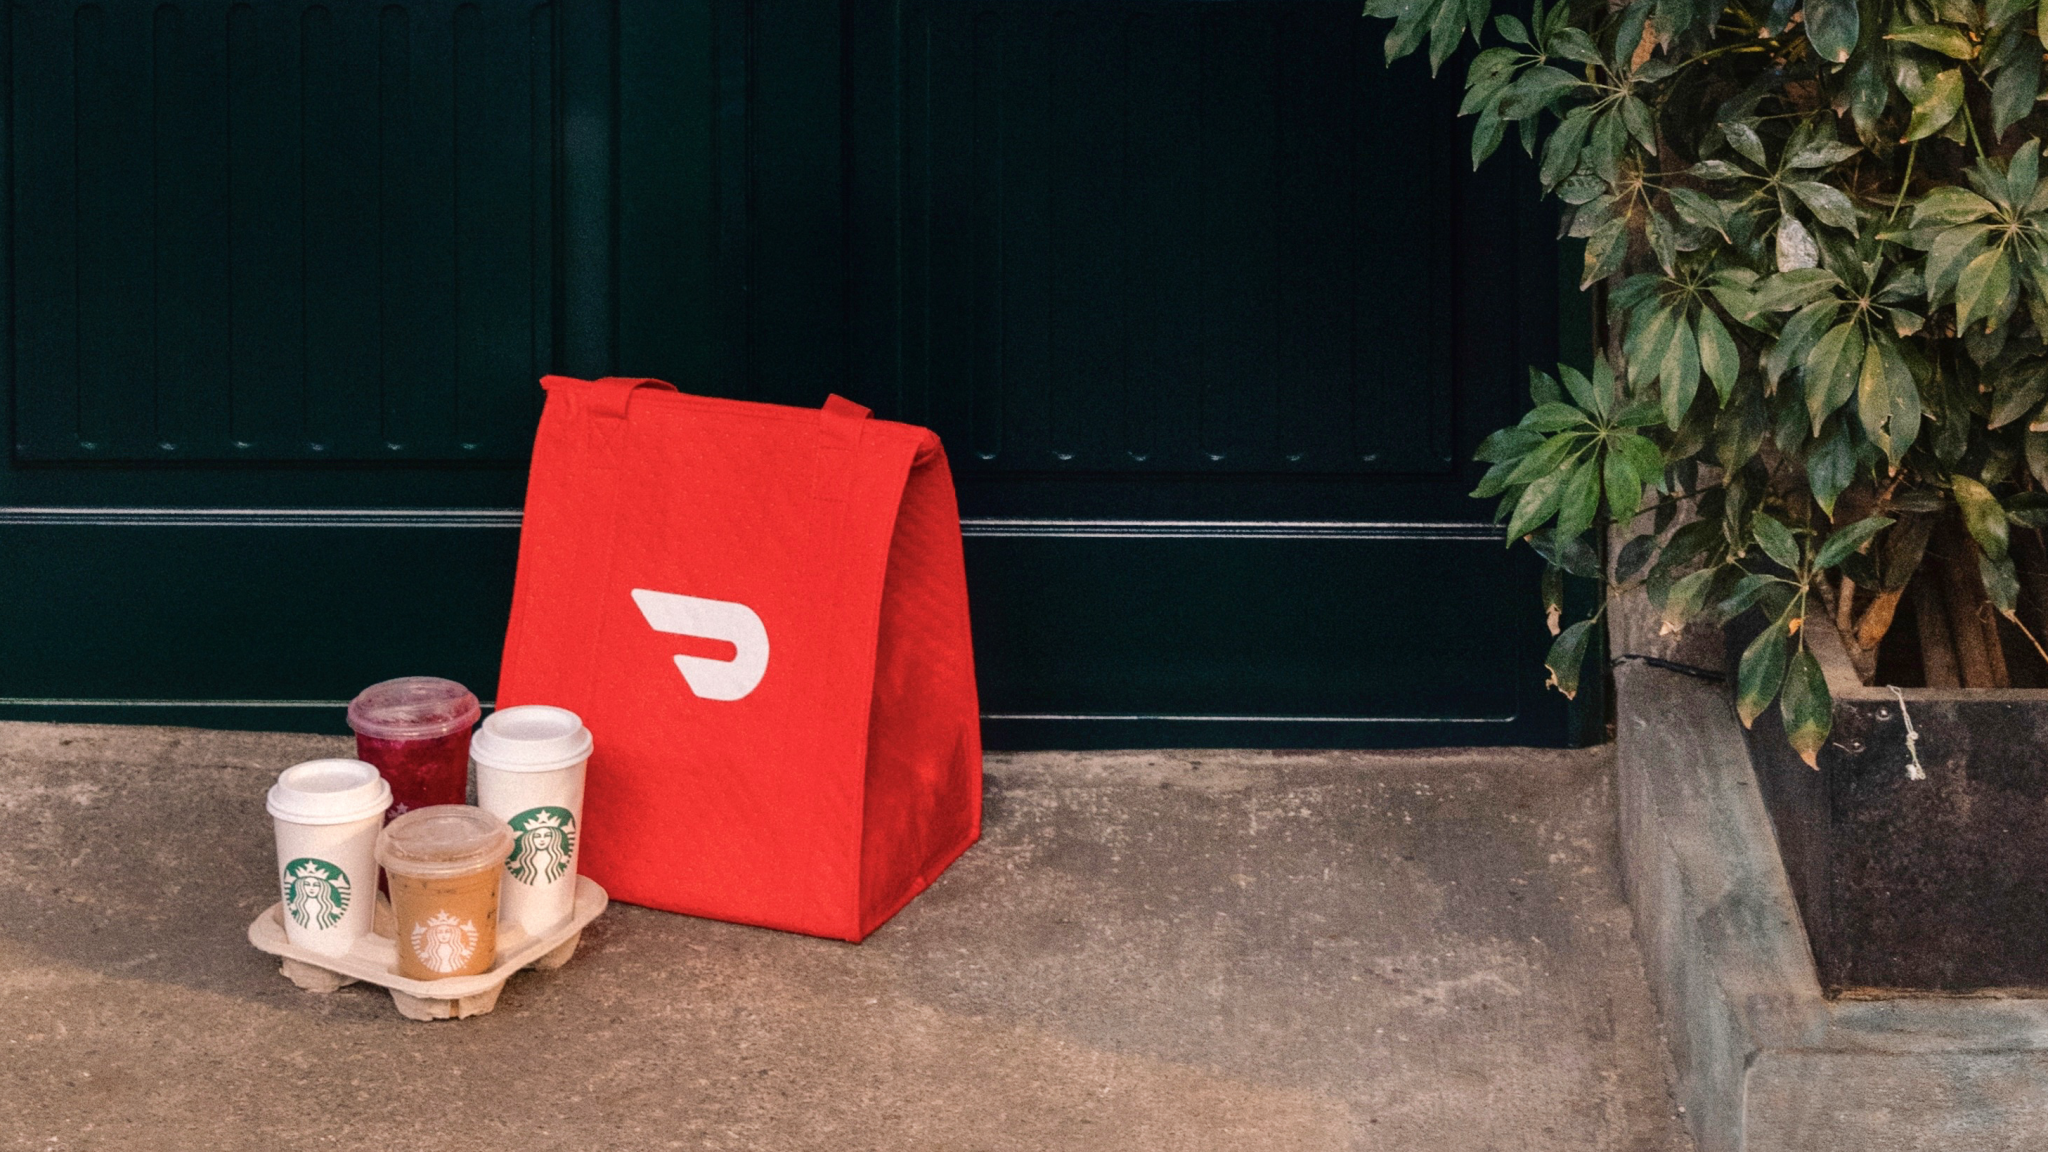 DoorDash Adds Best Buy as First National Consumer Electronics